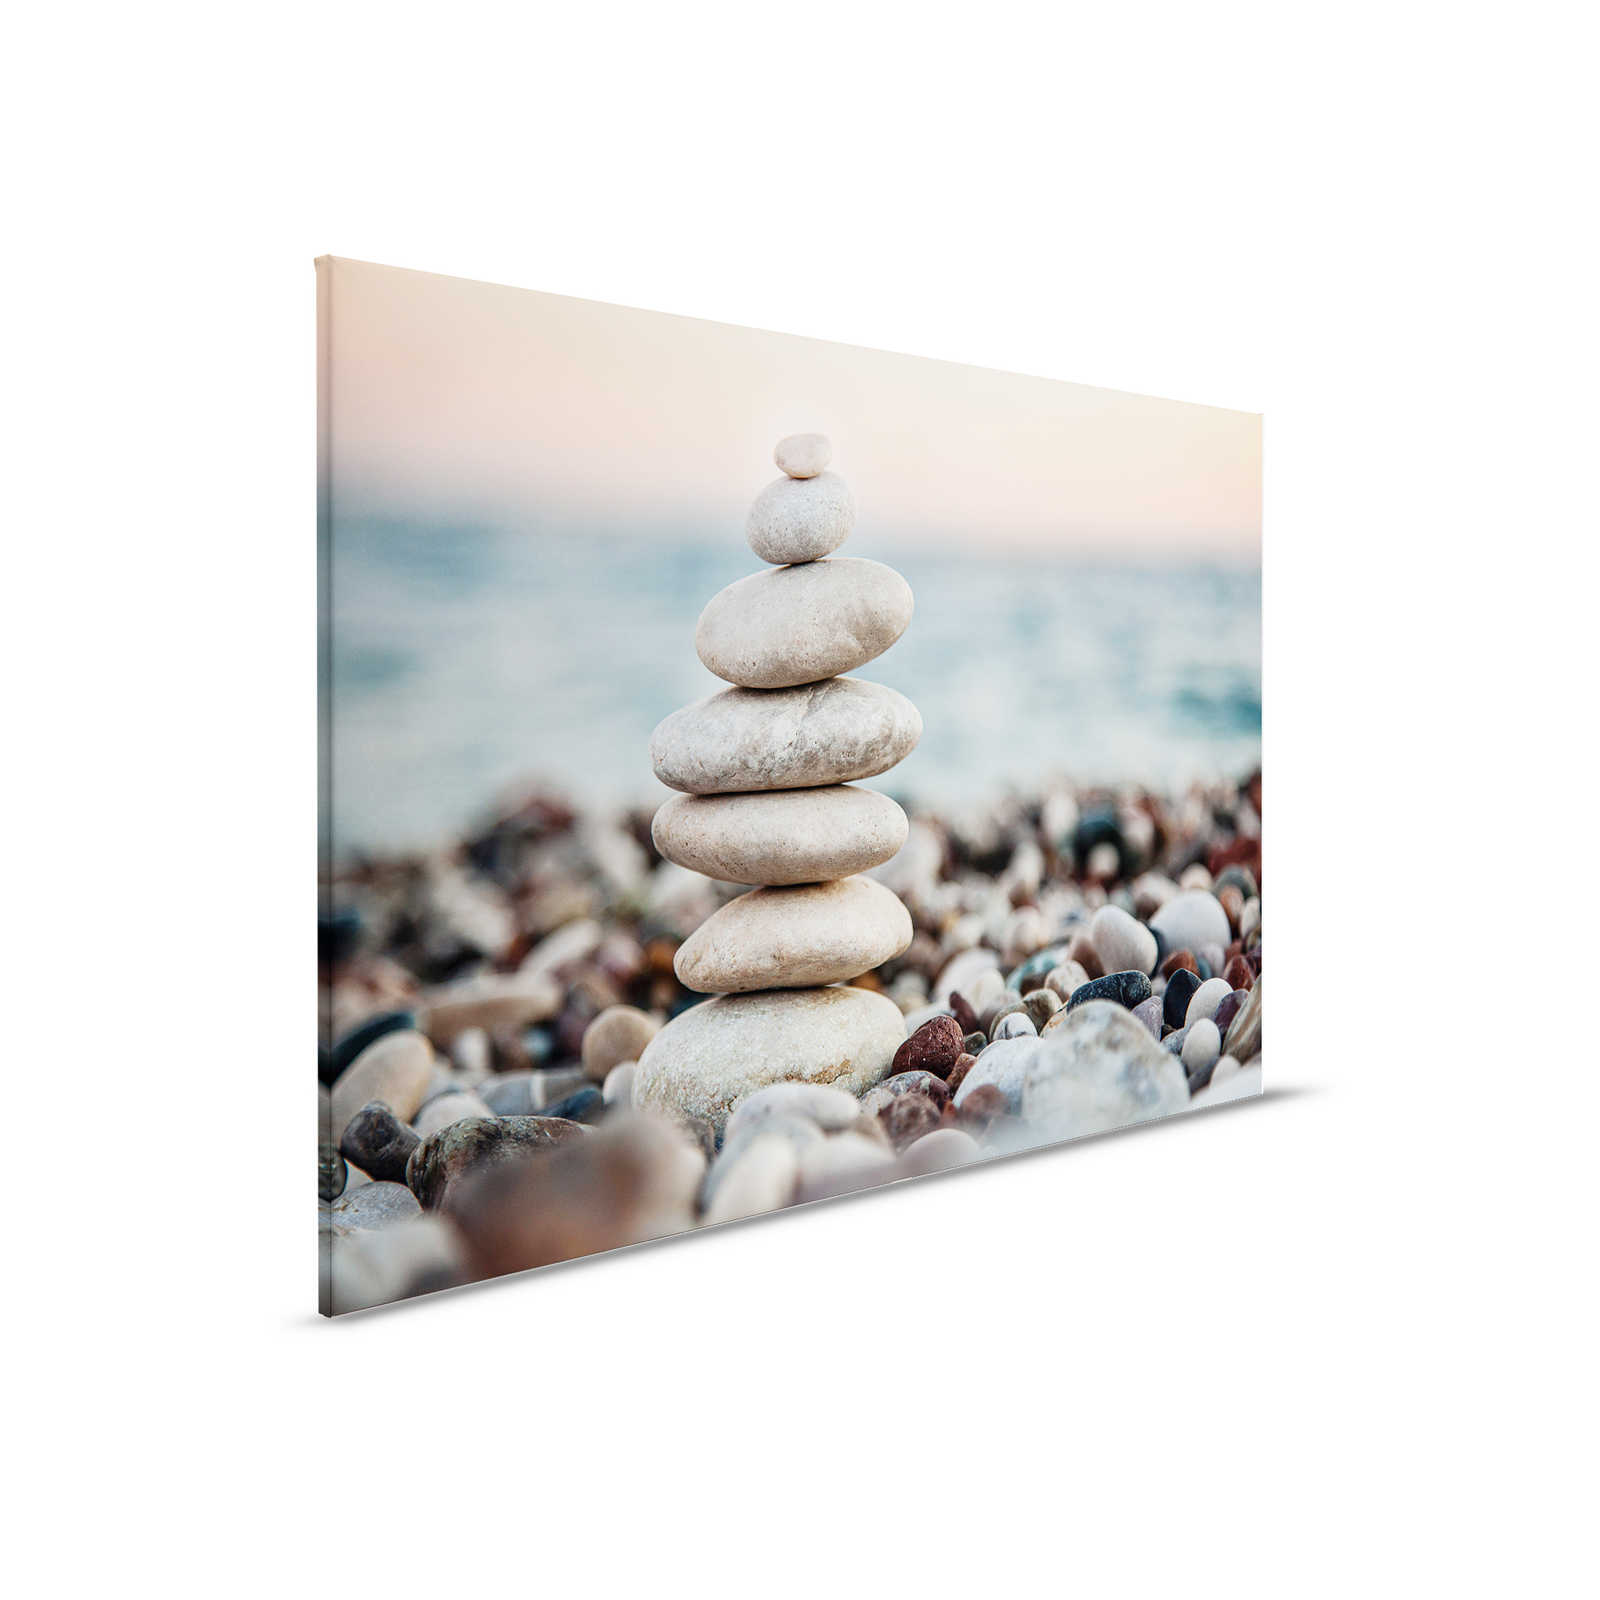         Canvas with stone tower by the sea | grey, blue - 0.90 m x 0.60 m
    